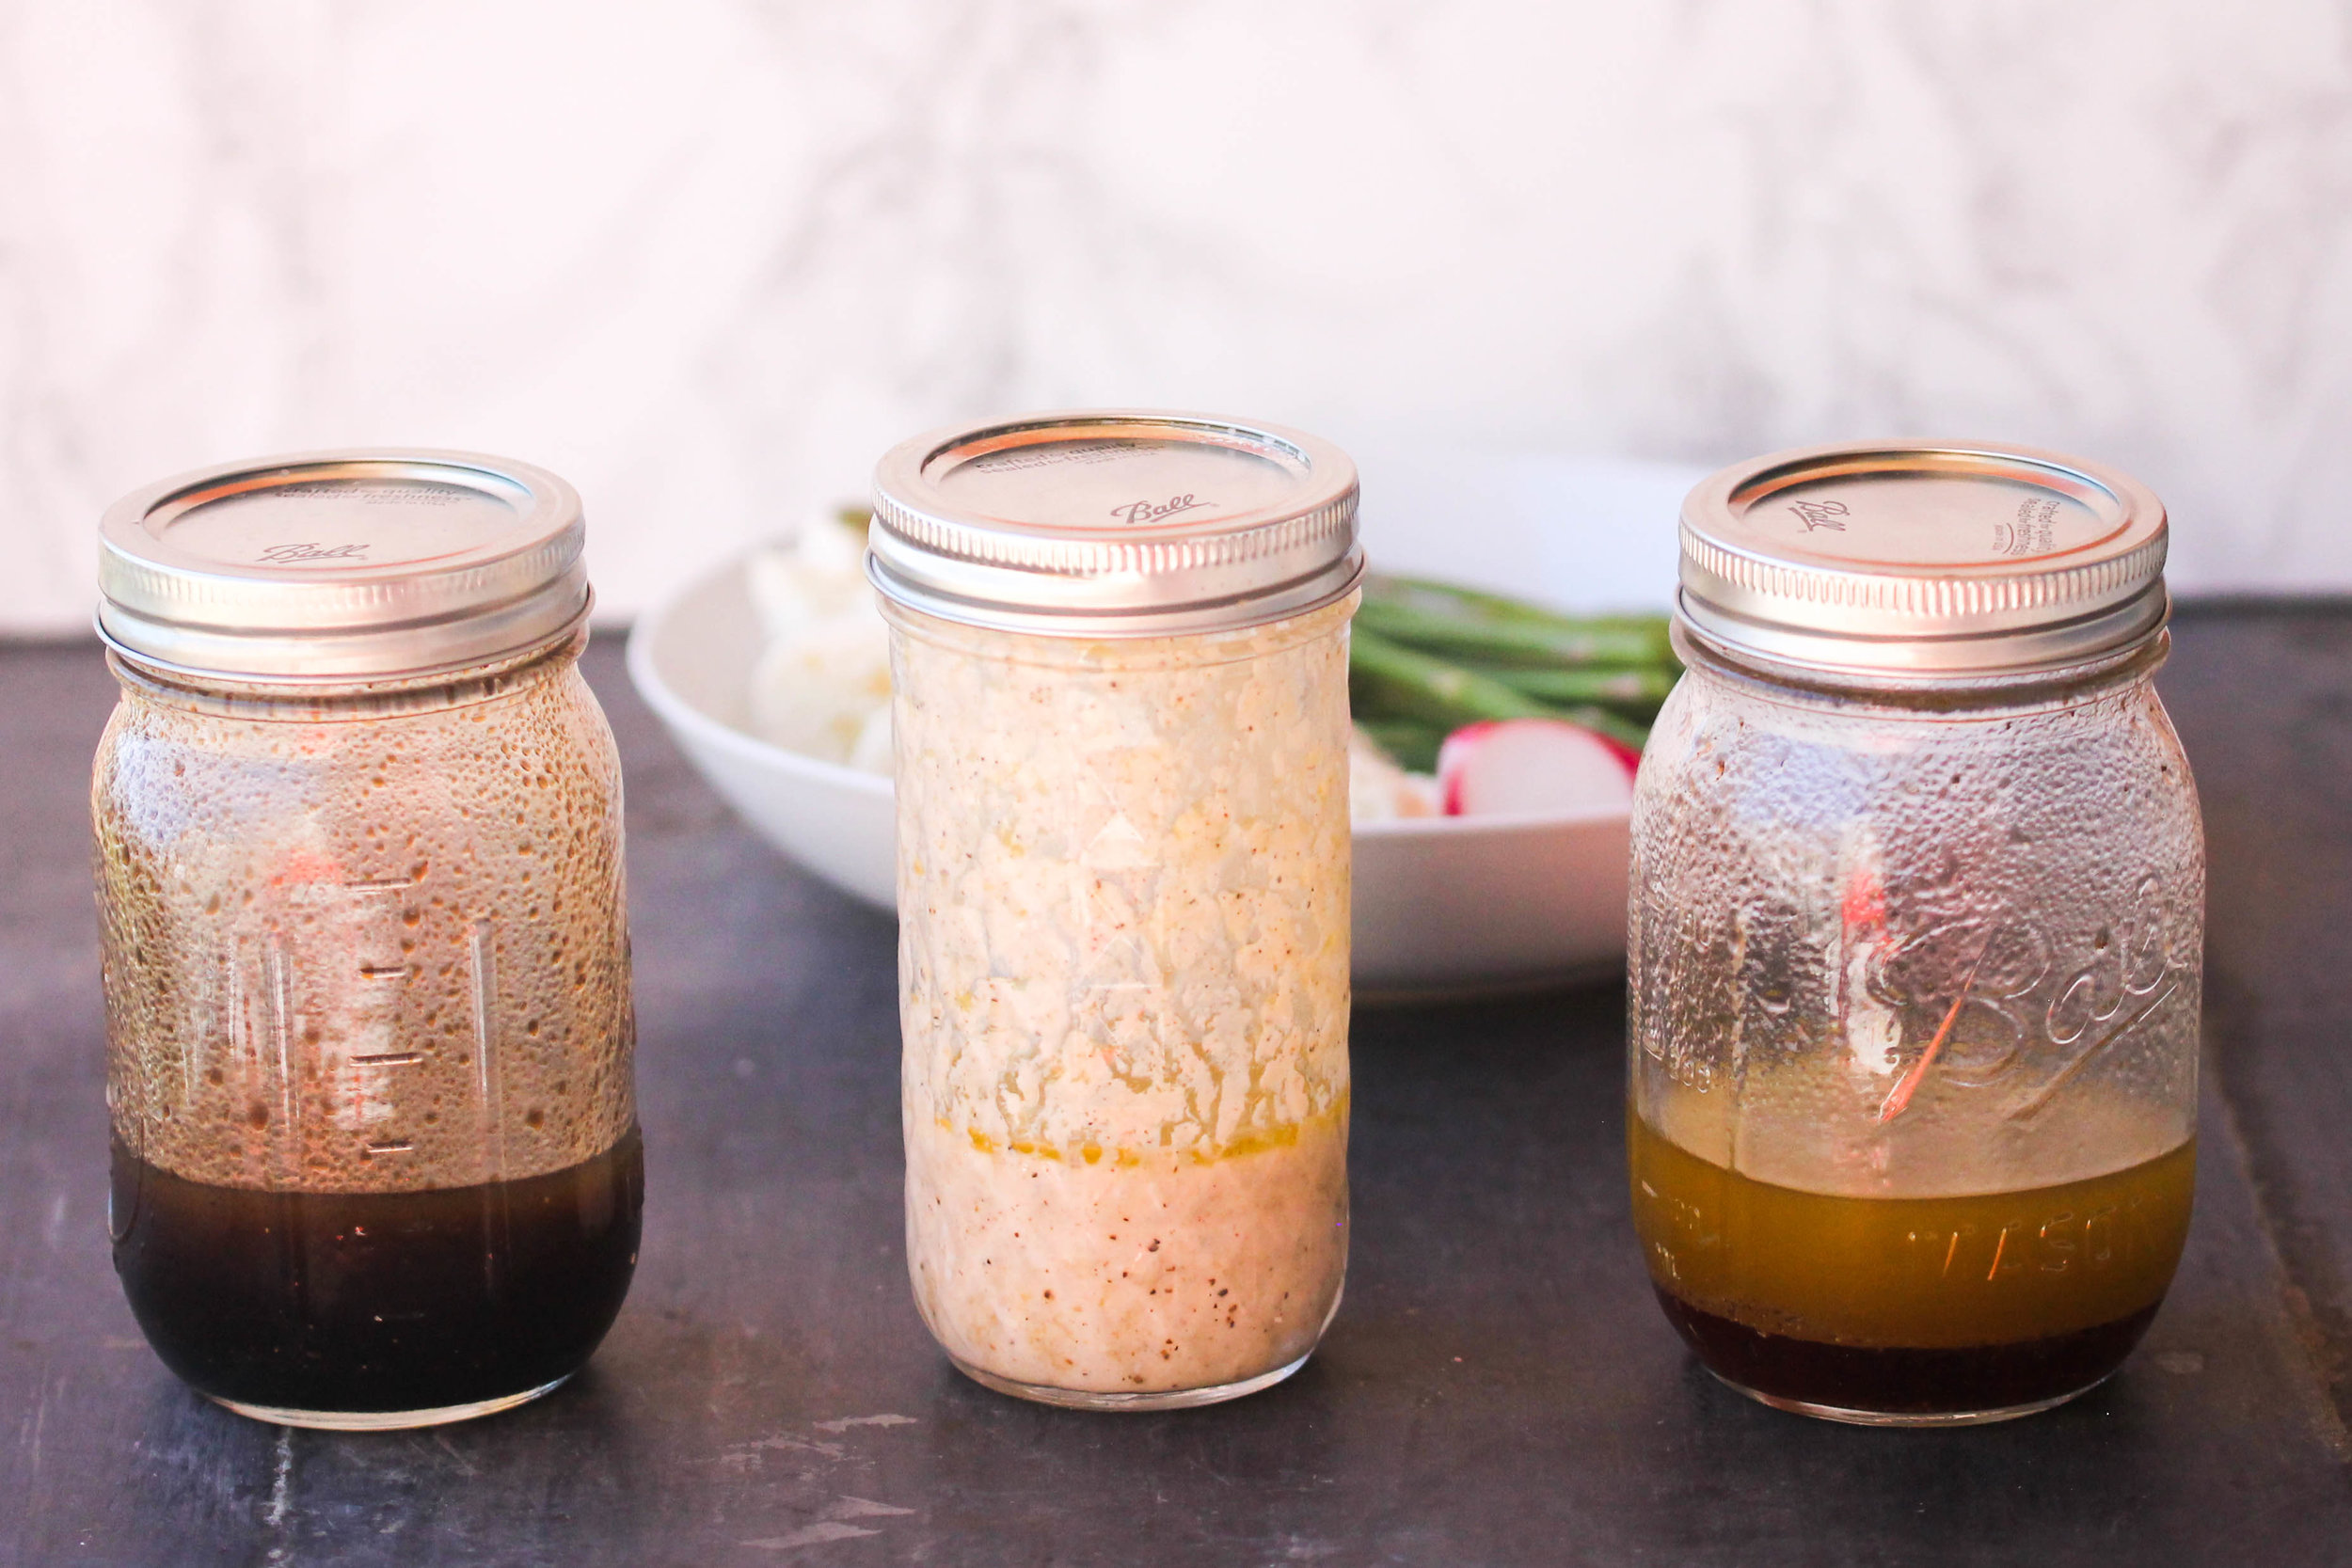 Make your own Basic Vinaigrette with 3 Variations utilizing basic pantry ingredients and a jar. It's easy, inexpensive, and flexible for all your salad and marinade needs.